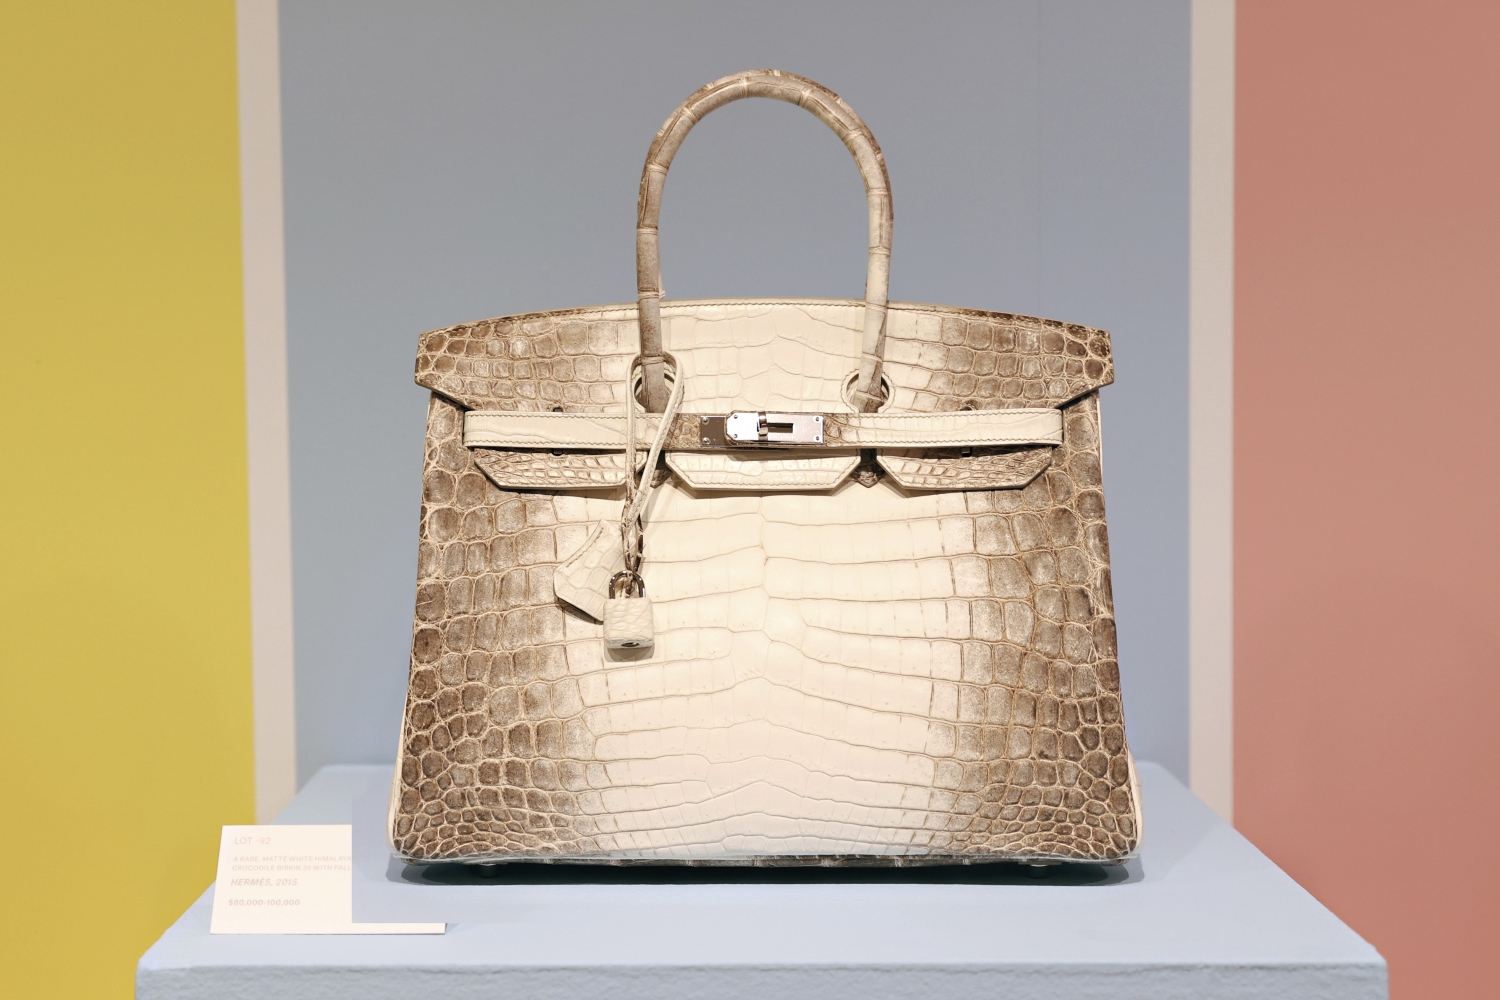 Could You Really Be Living Off Your Handbag Investments?